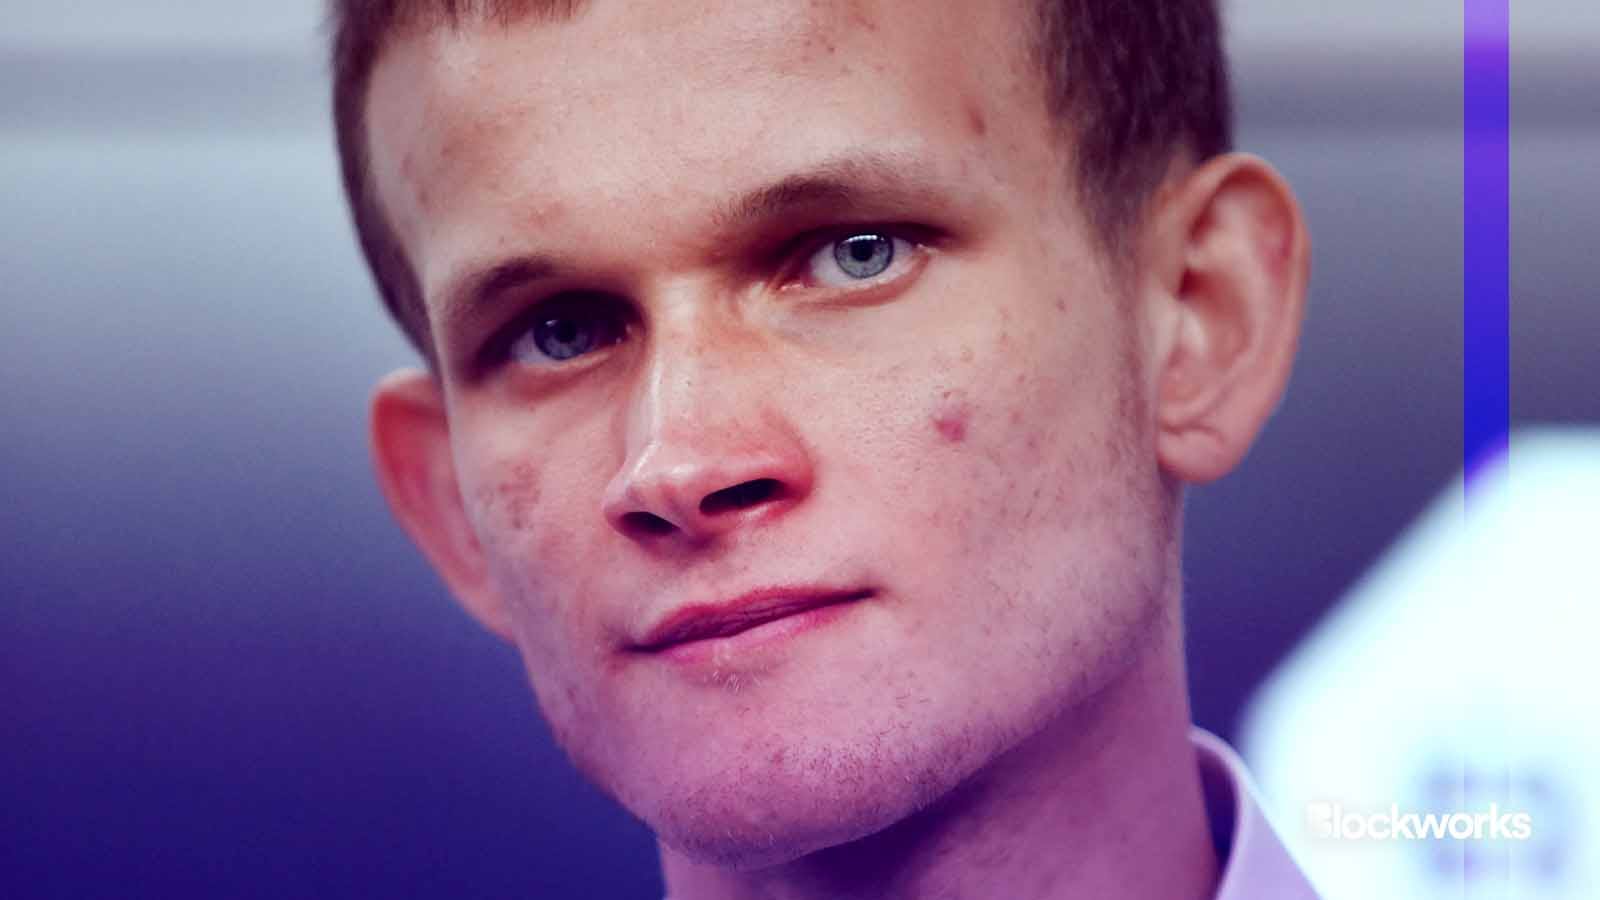 What is Plasma and why is Vitalik Buterin into it all over again ...